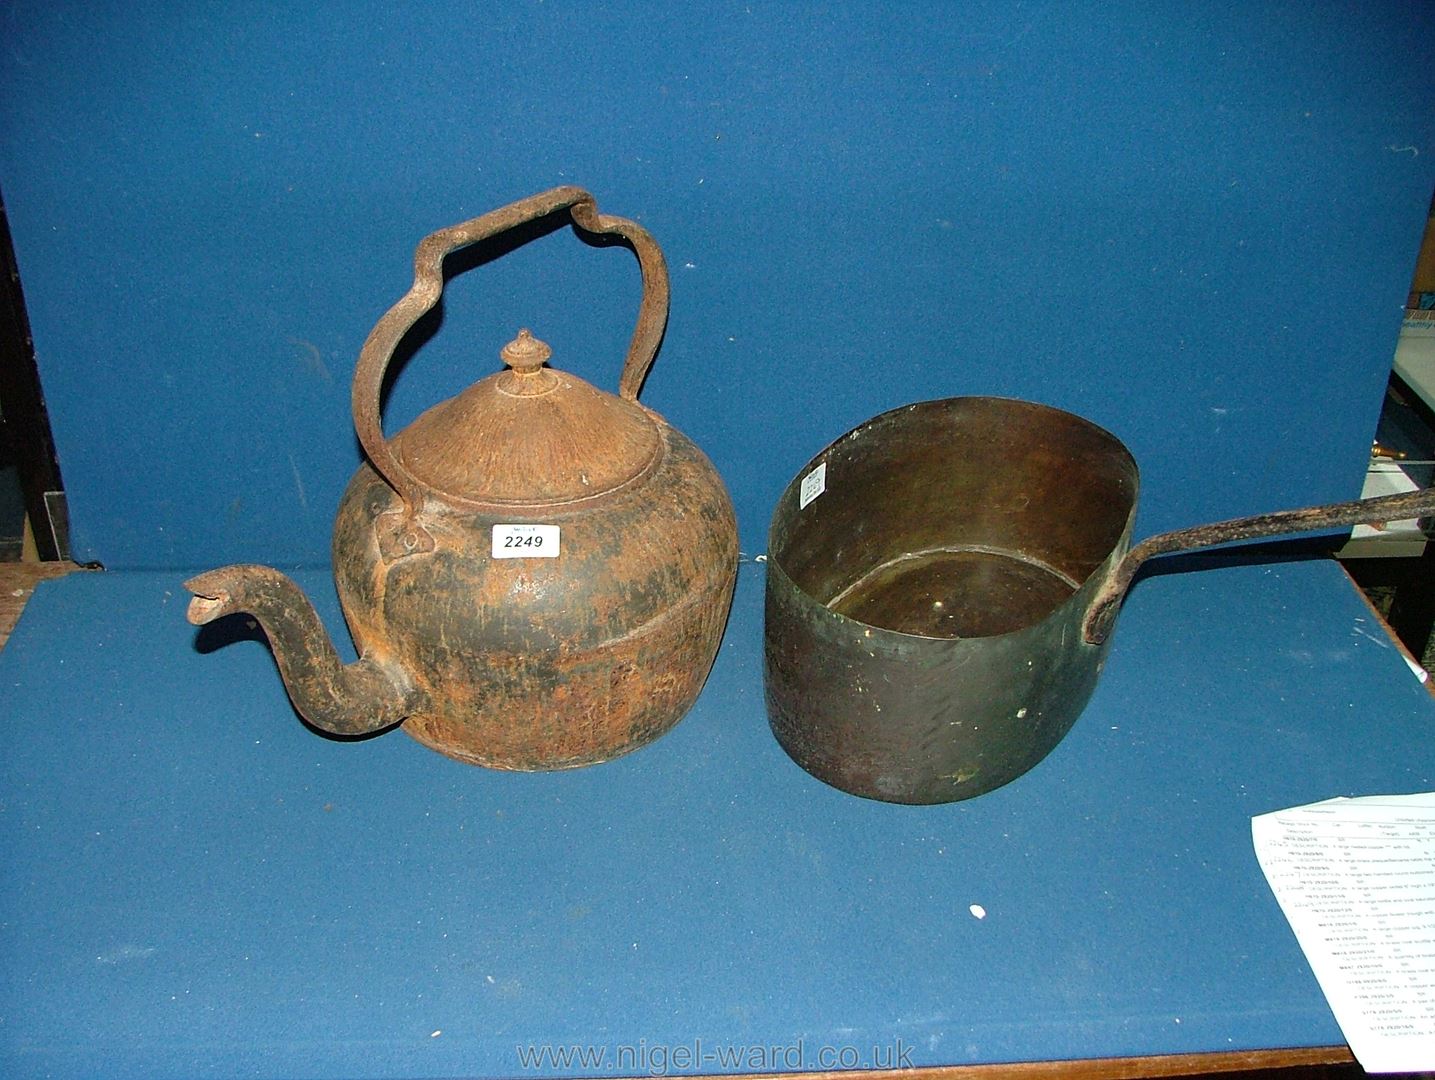 A large kettle and oval saucepan, both a/f.